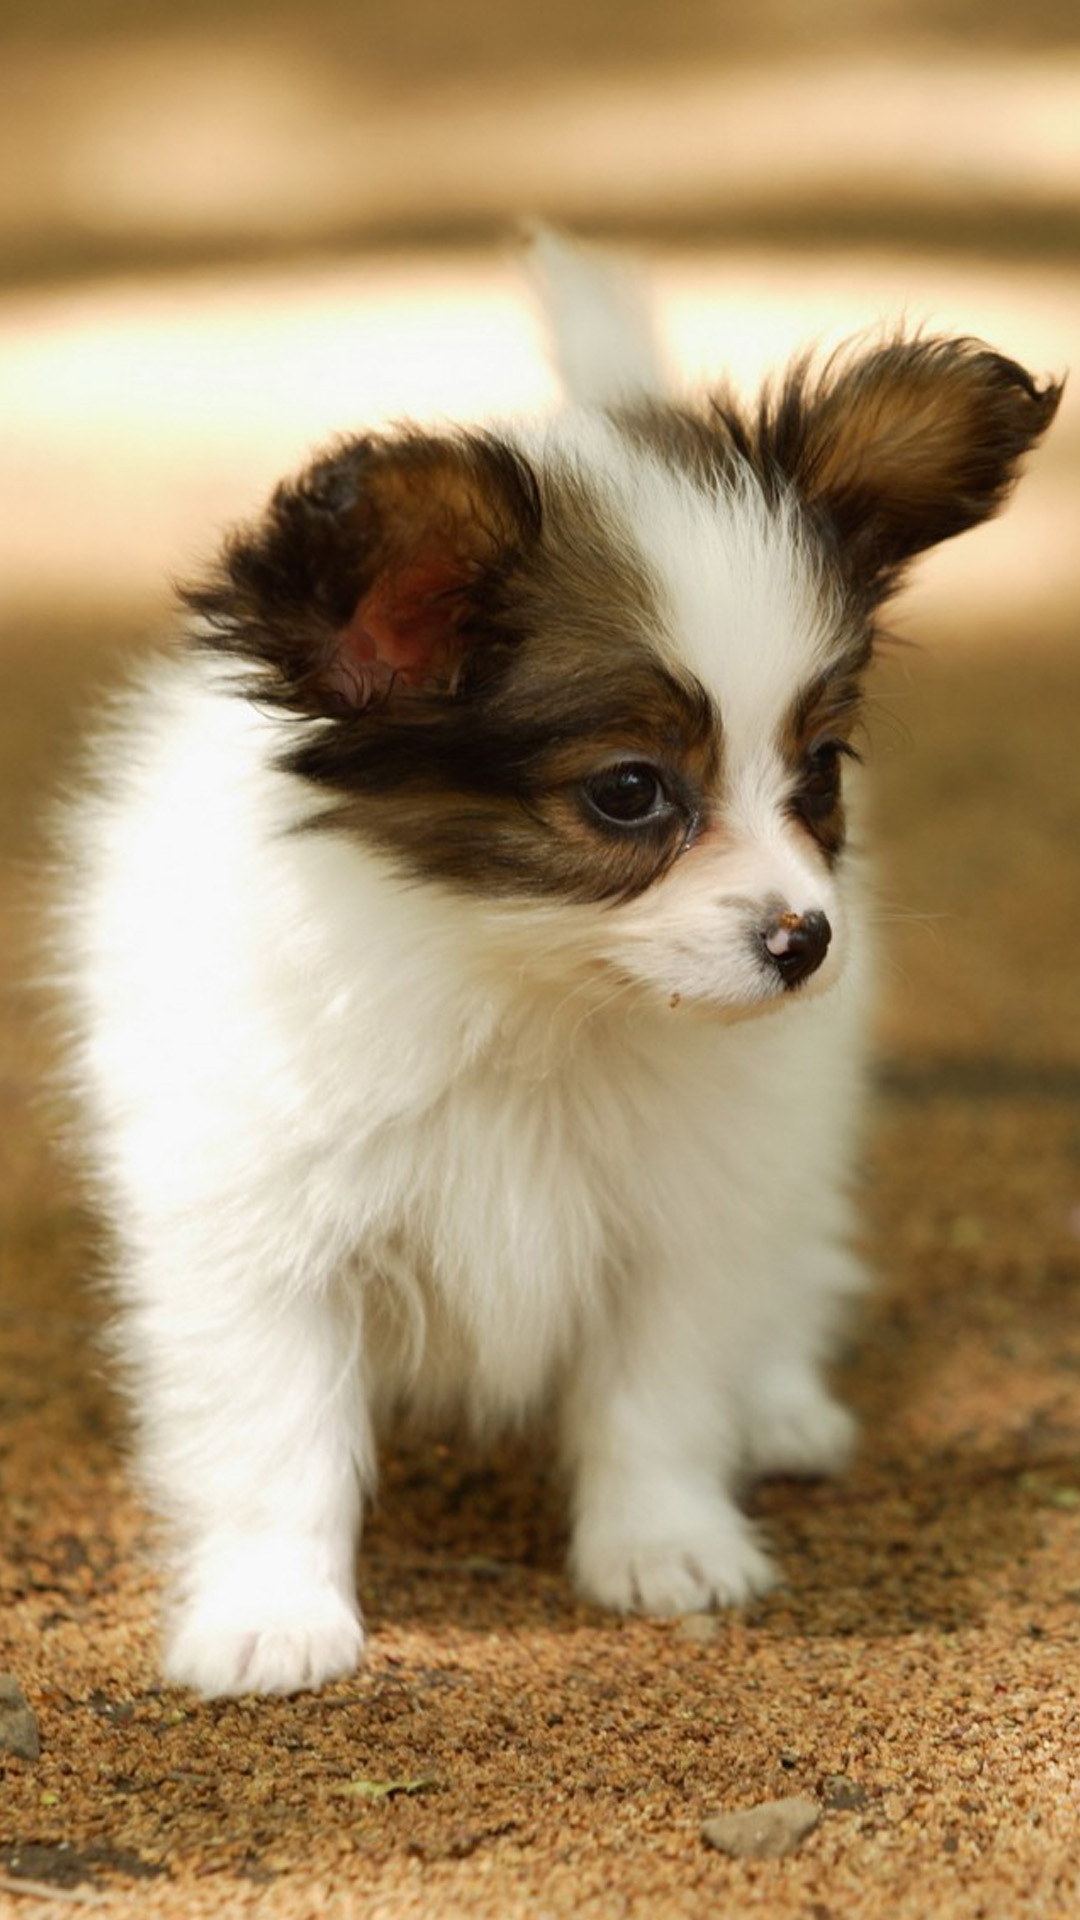 Cute Lovely Puppy Walking Dog Animal iPhone 6 wallpaper